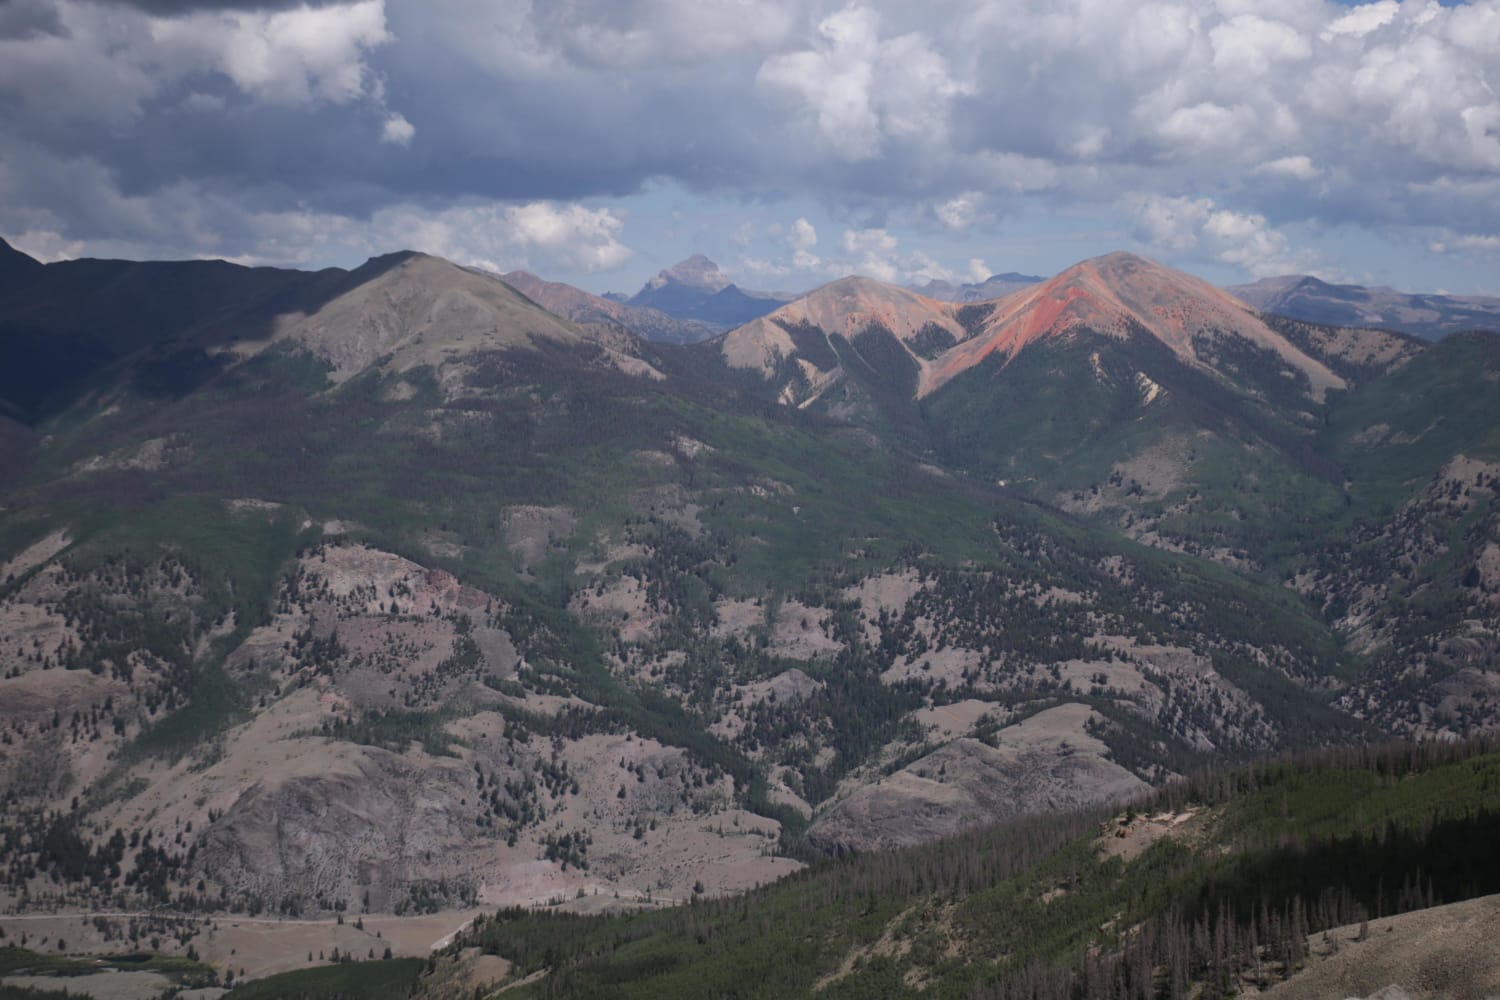 A breathtaking view of Grassy & Red Mountain in Lake City, CO from our trip up the Continental Divide.